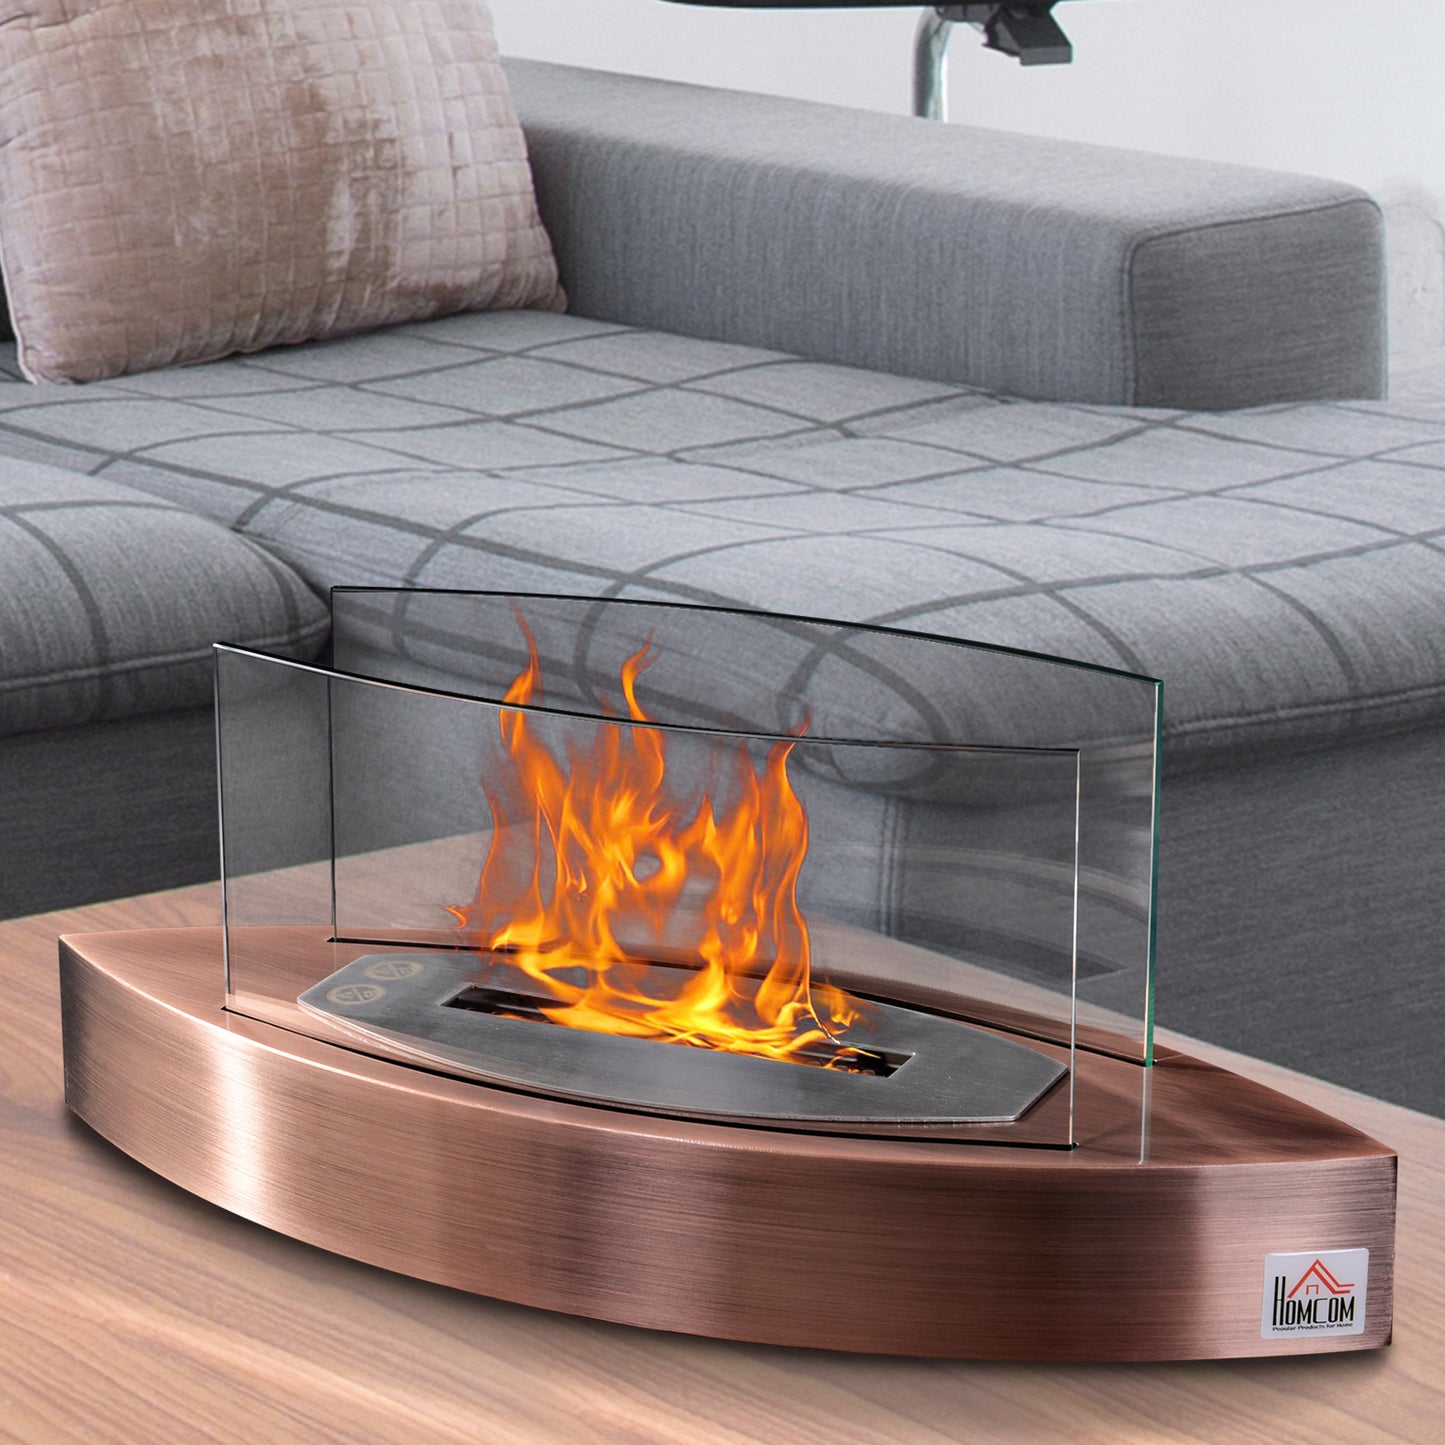 Tabletop Ethanol Fireplace with Clean-Burning Bioethanol Fuel